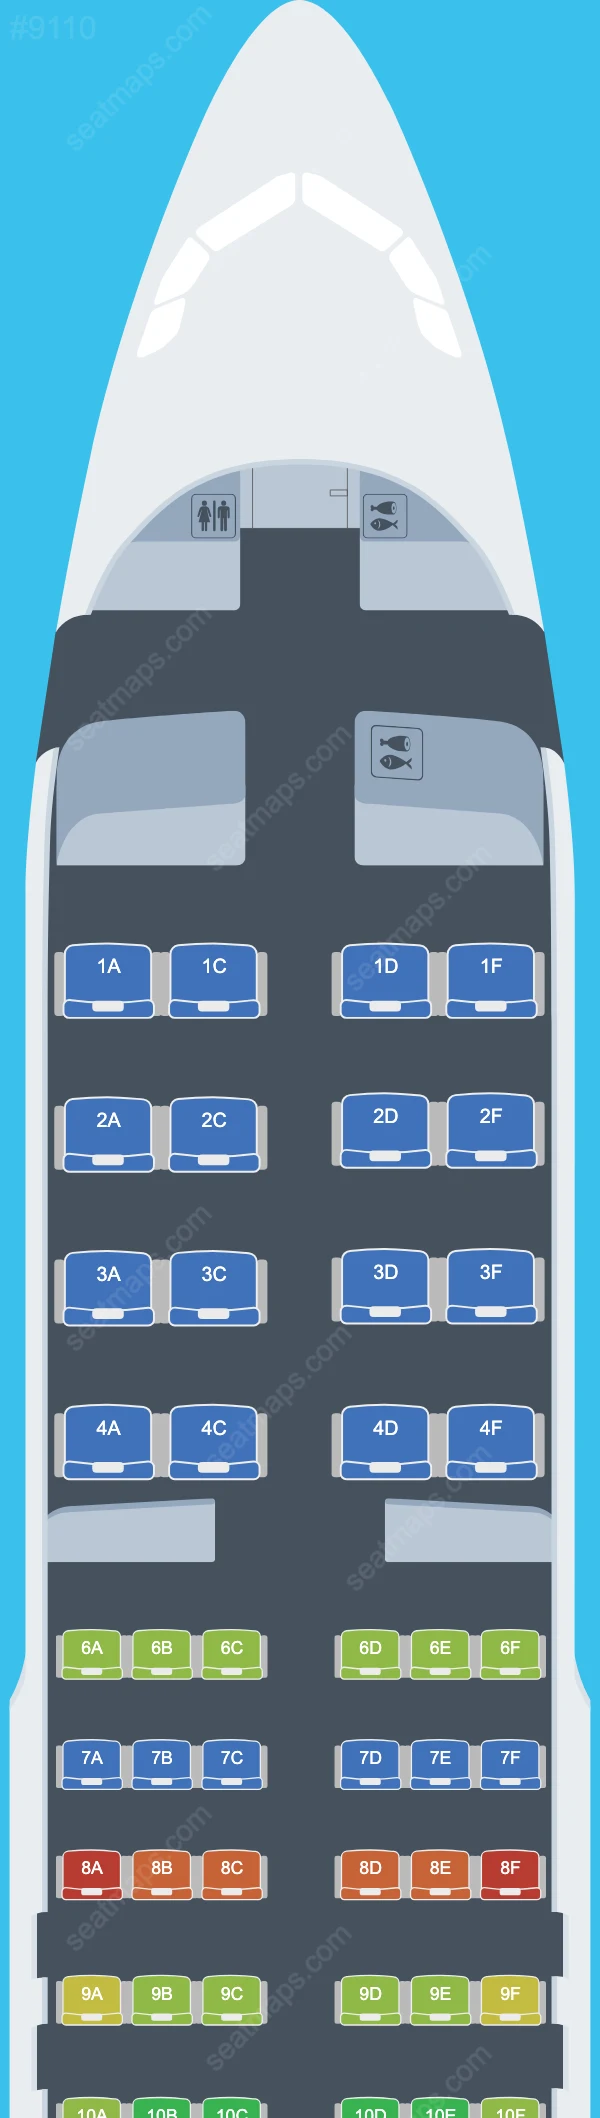 Bamboo Airways Airbus A320 Seat Maps A320-200 V.2